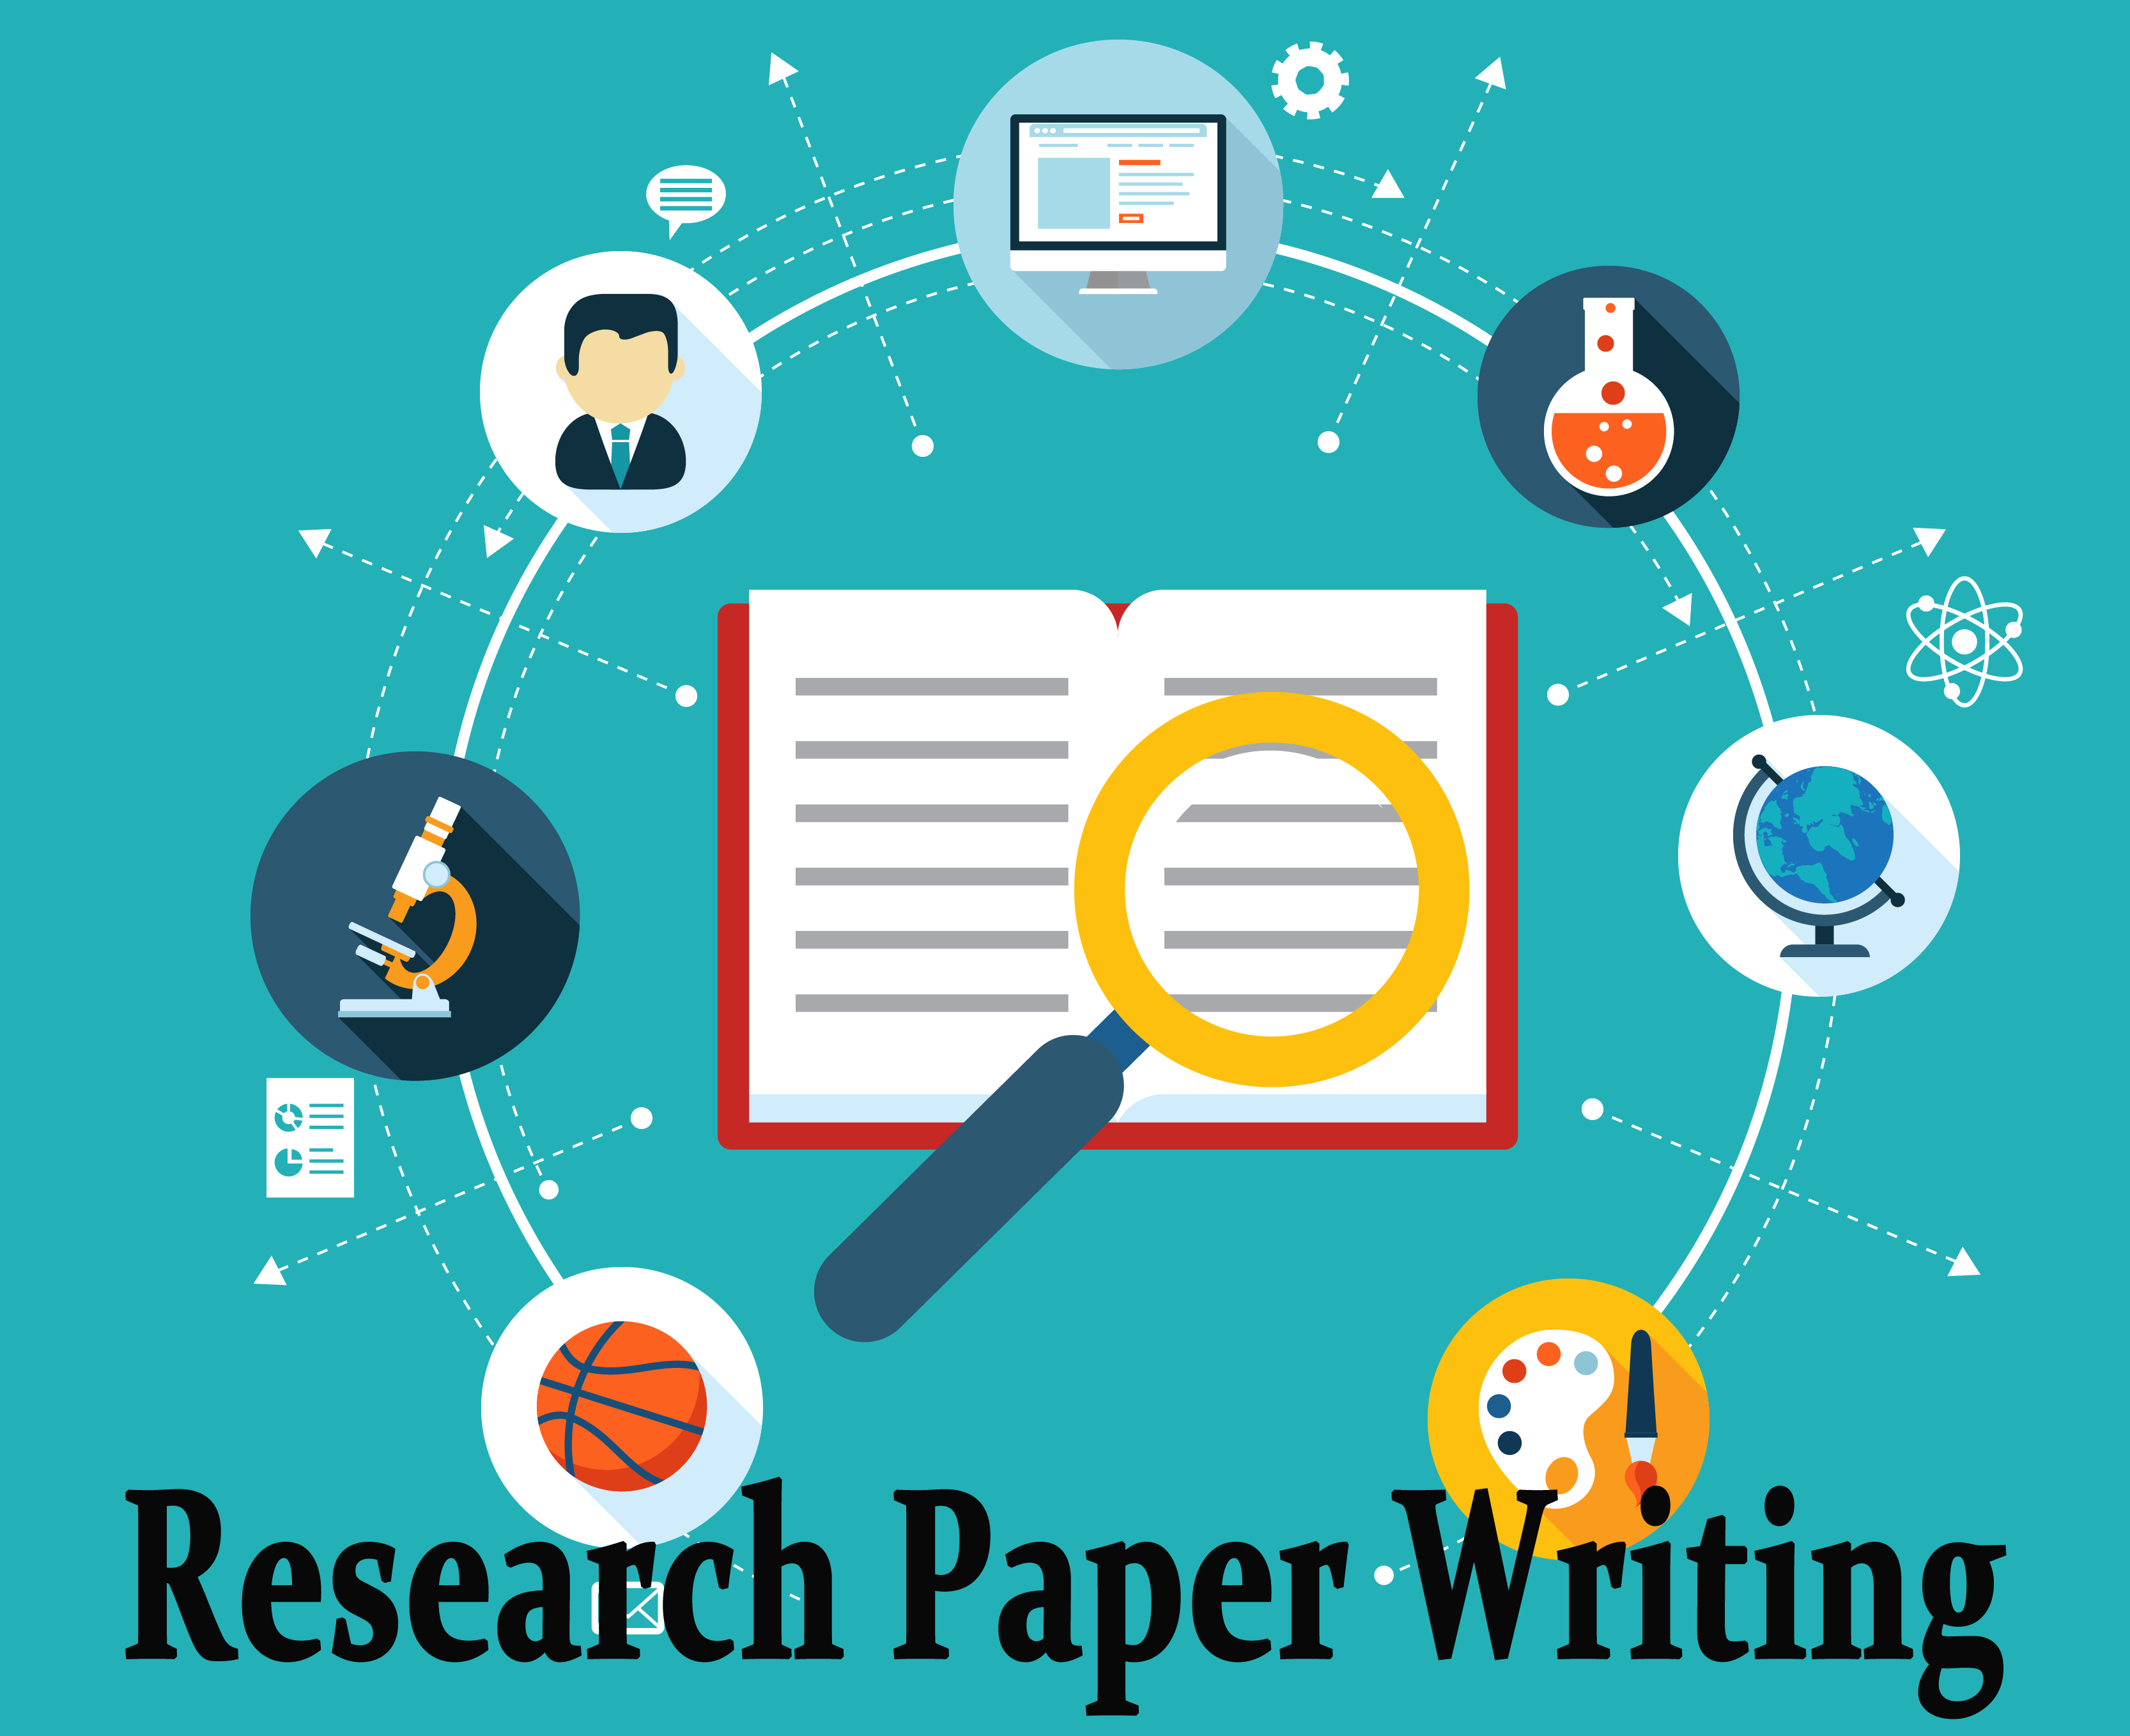 How to produce an effective research paper